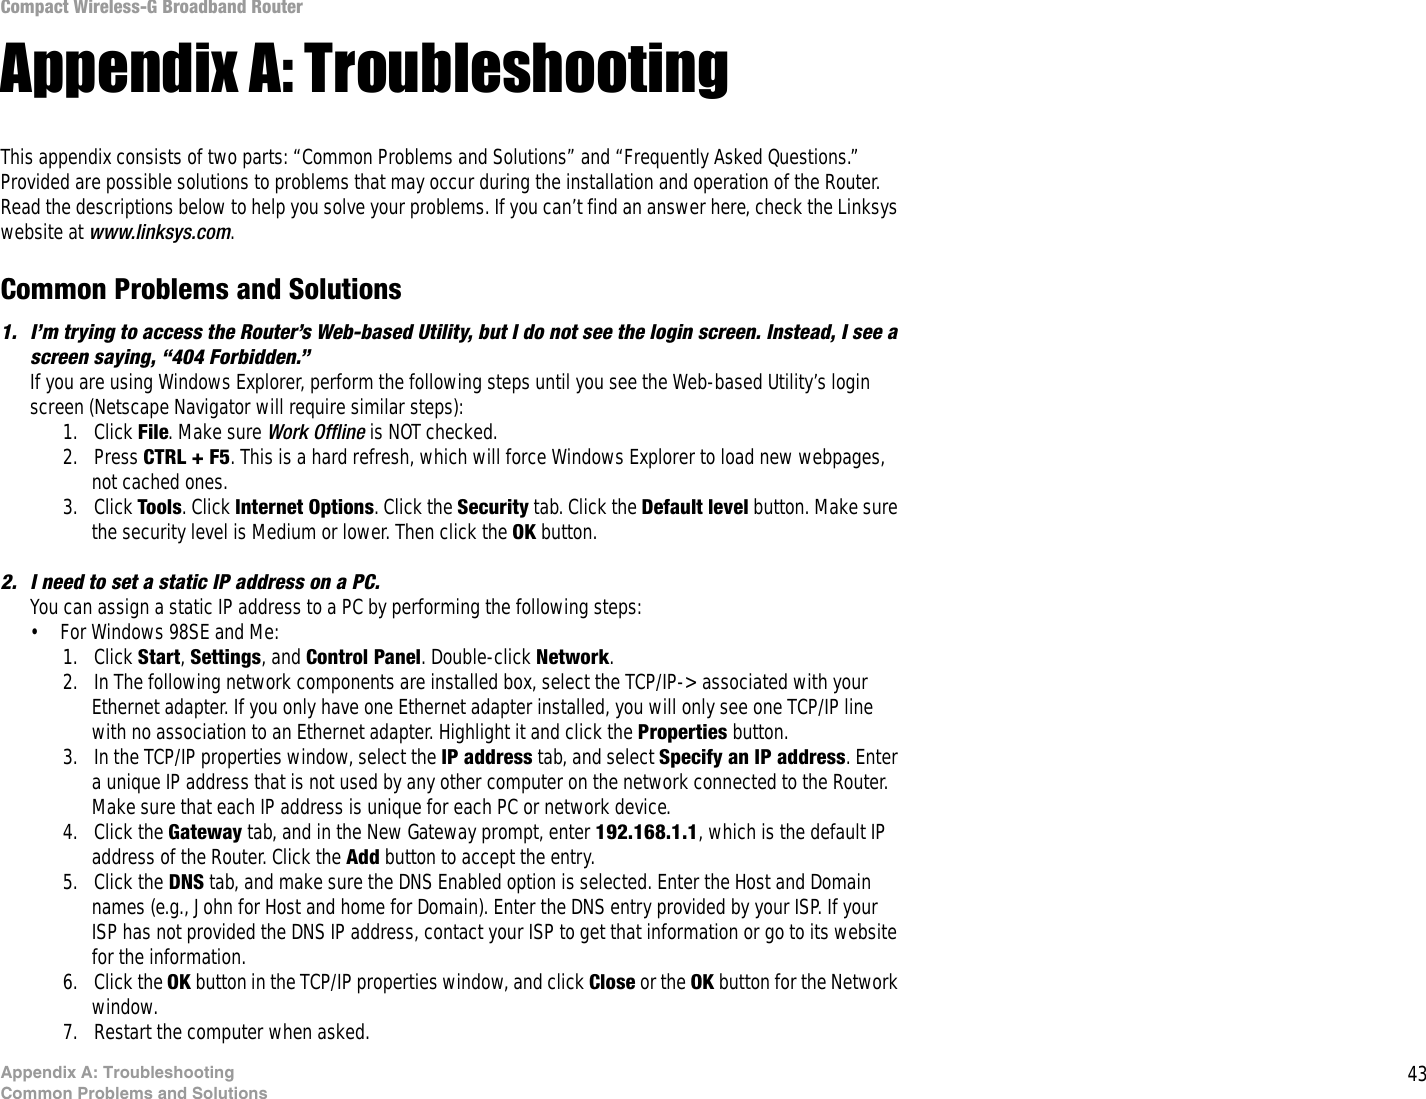 43Appendix A: TroubleshootingCommon Problems and SolutionsCompact Wireless-G Broadband RouterAppendix A: TroubleshootingThis appendix consists of two parts: “Common Problems and Solutions” and “Frequently Asked Questions.” Provided are possible solutions to problems that may occur during the installation and operation of the Router. Read the descriptions below to help you solve your problems. If you can’t find an answer here, check the Linksys website at www.linksys.com.Common Problems and Solutions1. I’m trying to access the Router’s Web-based Utility, but I do not see the login screen. Instead, I see a screen saying, “404 Forbidden.”If you are using Windows Explorer, perform the following steps until you see the Web-based Utility’s login screen (Netscape Navigator will require similar steps):1. Click File. Make sure Work Offline is NOT checked.2. Press CTRL + F5. This is a hard refresh, which will force Windows Explorer to load new webpages, not cached ones.3. Click Tools. Click Internet Options. Click the Security tab. Click the Default level button. Make sure the security level is Medium or lower. Then click the OK button.2. I need to set a static IP address on a PC.You can assign a static IP address to a PC by performing the following steps:• For Windows 98SE and Me:1. Click Start, Settings, and Control Panel. Double-click Network.2. In The following network components are installed box, select the TCP/IP-&gt; associated with your Ethernet adapter. If you only have one Ethernet adapter installed, you will only see one TCP/IP line with no association to an Ethernet adapter. Highlight it and click the Properties button.3. In the TCP/IP properties window, select the IP address tab, and select Specify an IP address. Enter a unique IP address that is not used by any other computer on the network connected to the Router. Make sure that each IP address is unique for each PC or network device.4. Click the Gateway tab, and in the New Gateway prompt, enter 192.168.1.1, which is the default IP address of the Router. Click the Add button to accept the entry.5. Click the DNS tab, and make sure the DNS Enabled option is selected. Enter the Host and Domain names (e.g., John for Host and home for Domain). Enter the DNS entry provided by your ISP. If your ISP has not provided the DNS IP address, contact your ISP to get that information or go to its website for the information.6. Click the OK button in the TCP/IP properties window, and click Close or the OK button for the Network window.7. Restart the computer when asked.